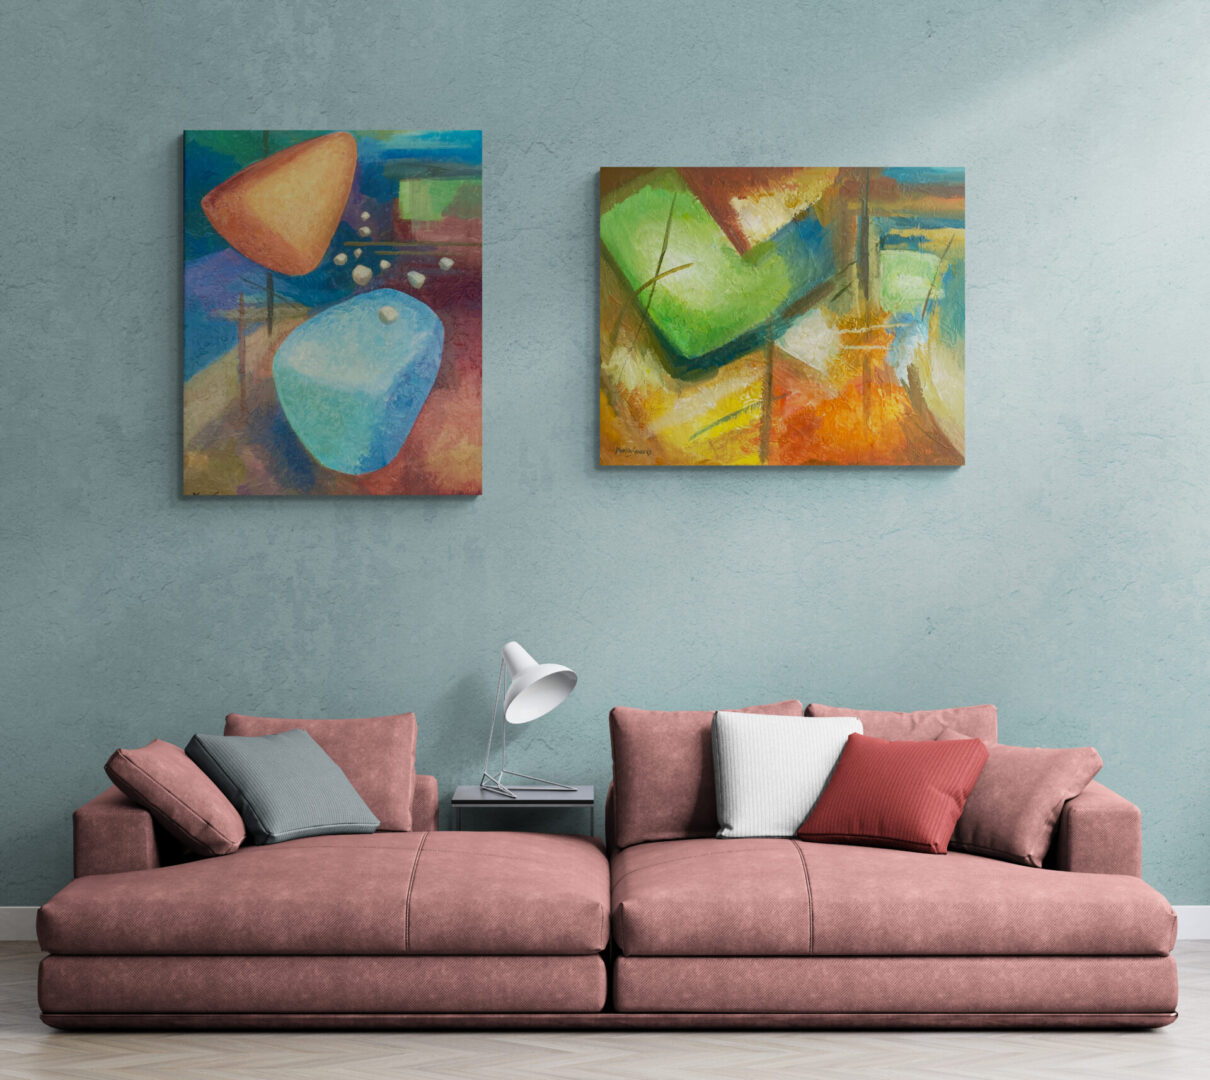 A living room with two local fine art paintings for sale on the wall.